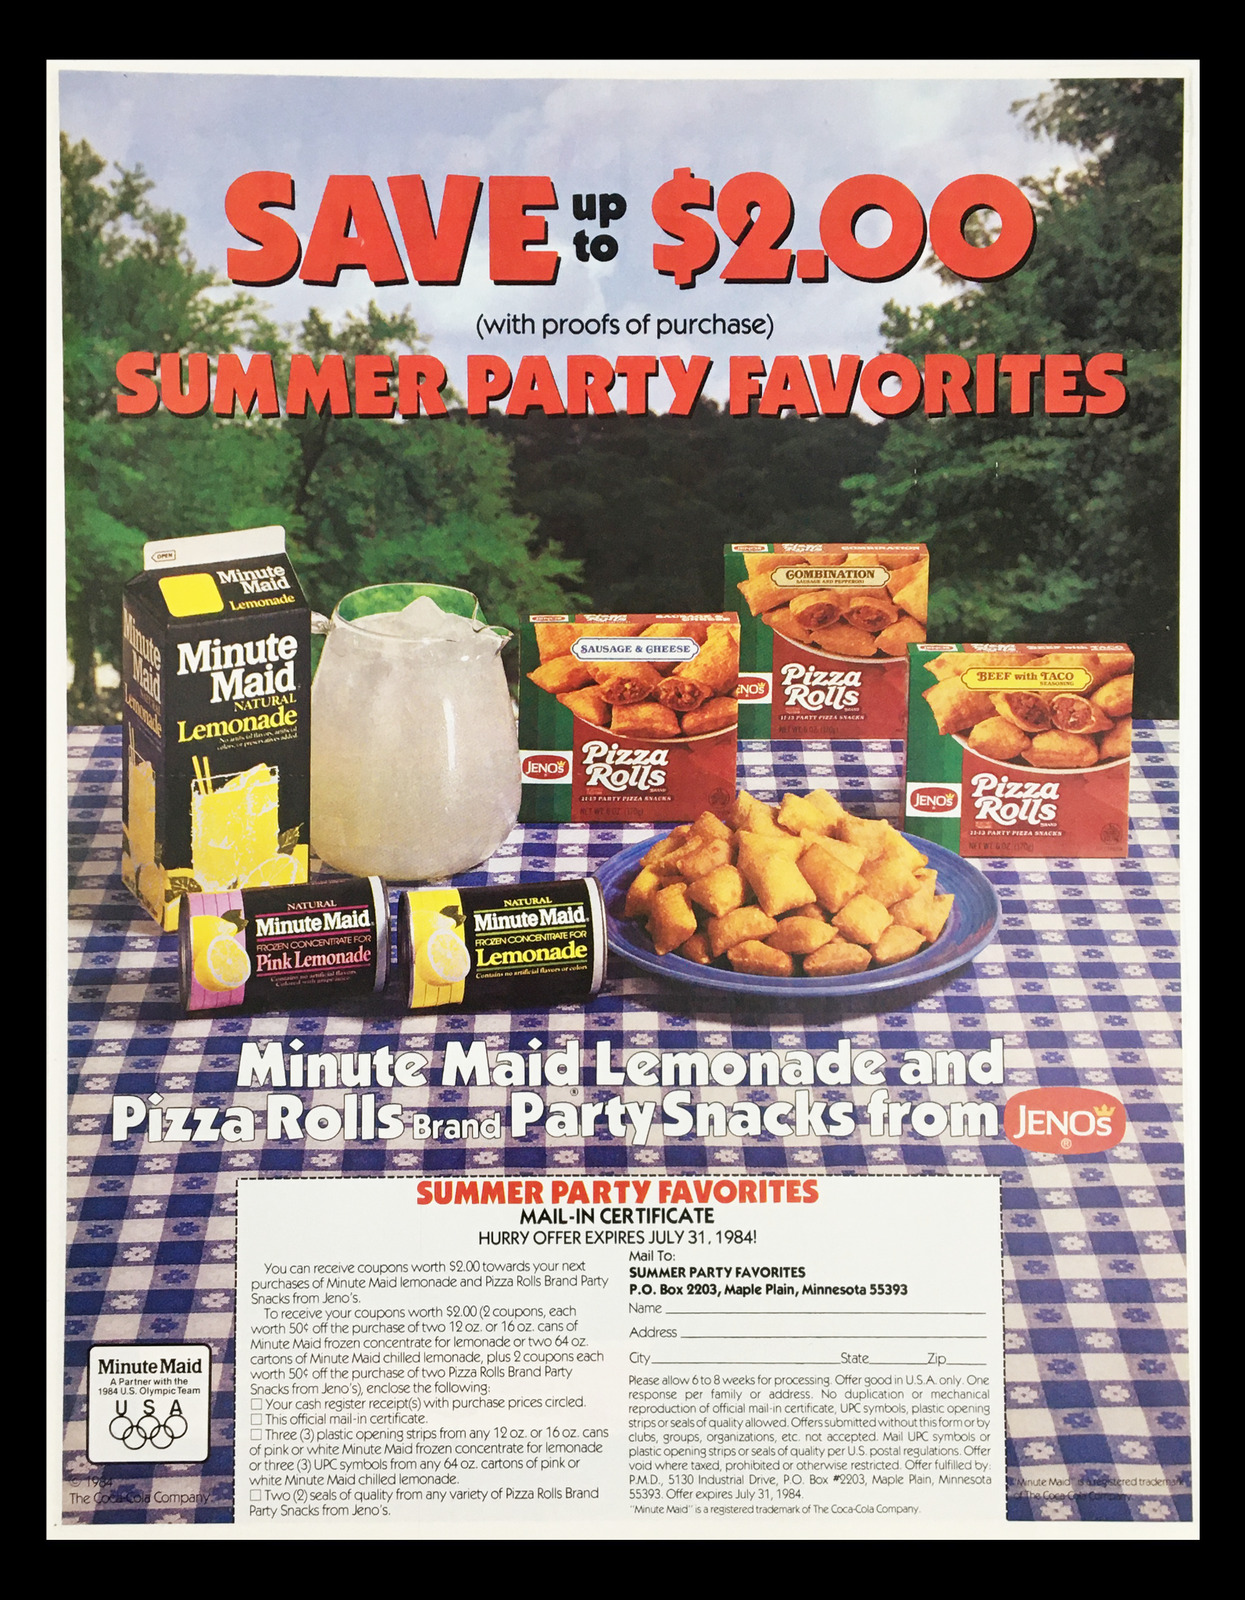 1984 Minute Maid Summer Party Favorites Circular Coupon Advertisement